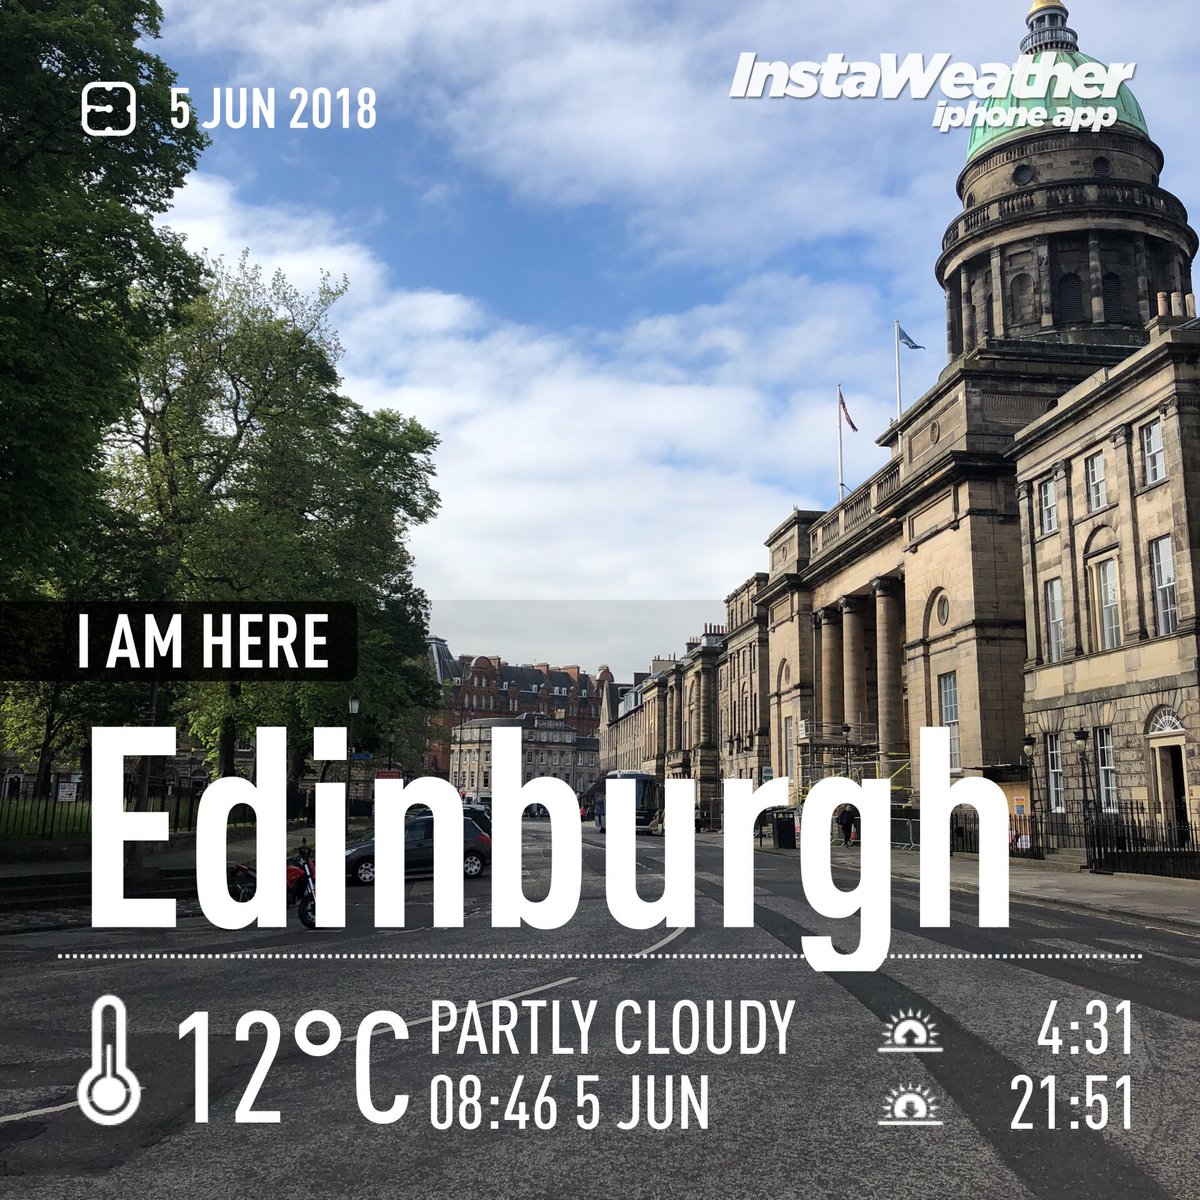 Lovely morning in the capital - walking to Cabinet through #CharlotteSquare @WindyWilson88